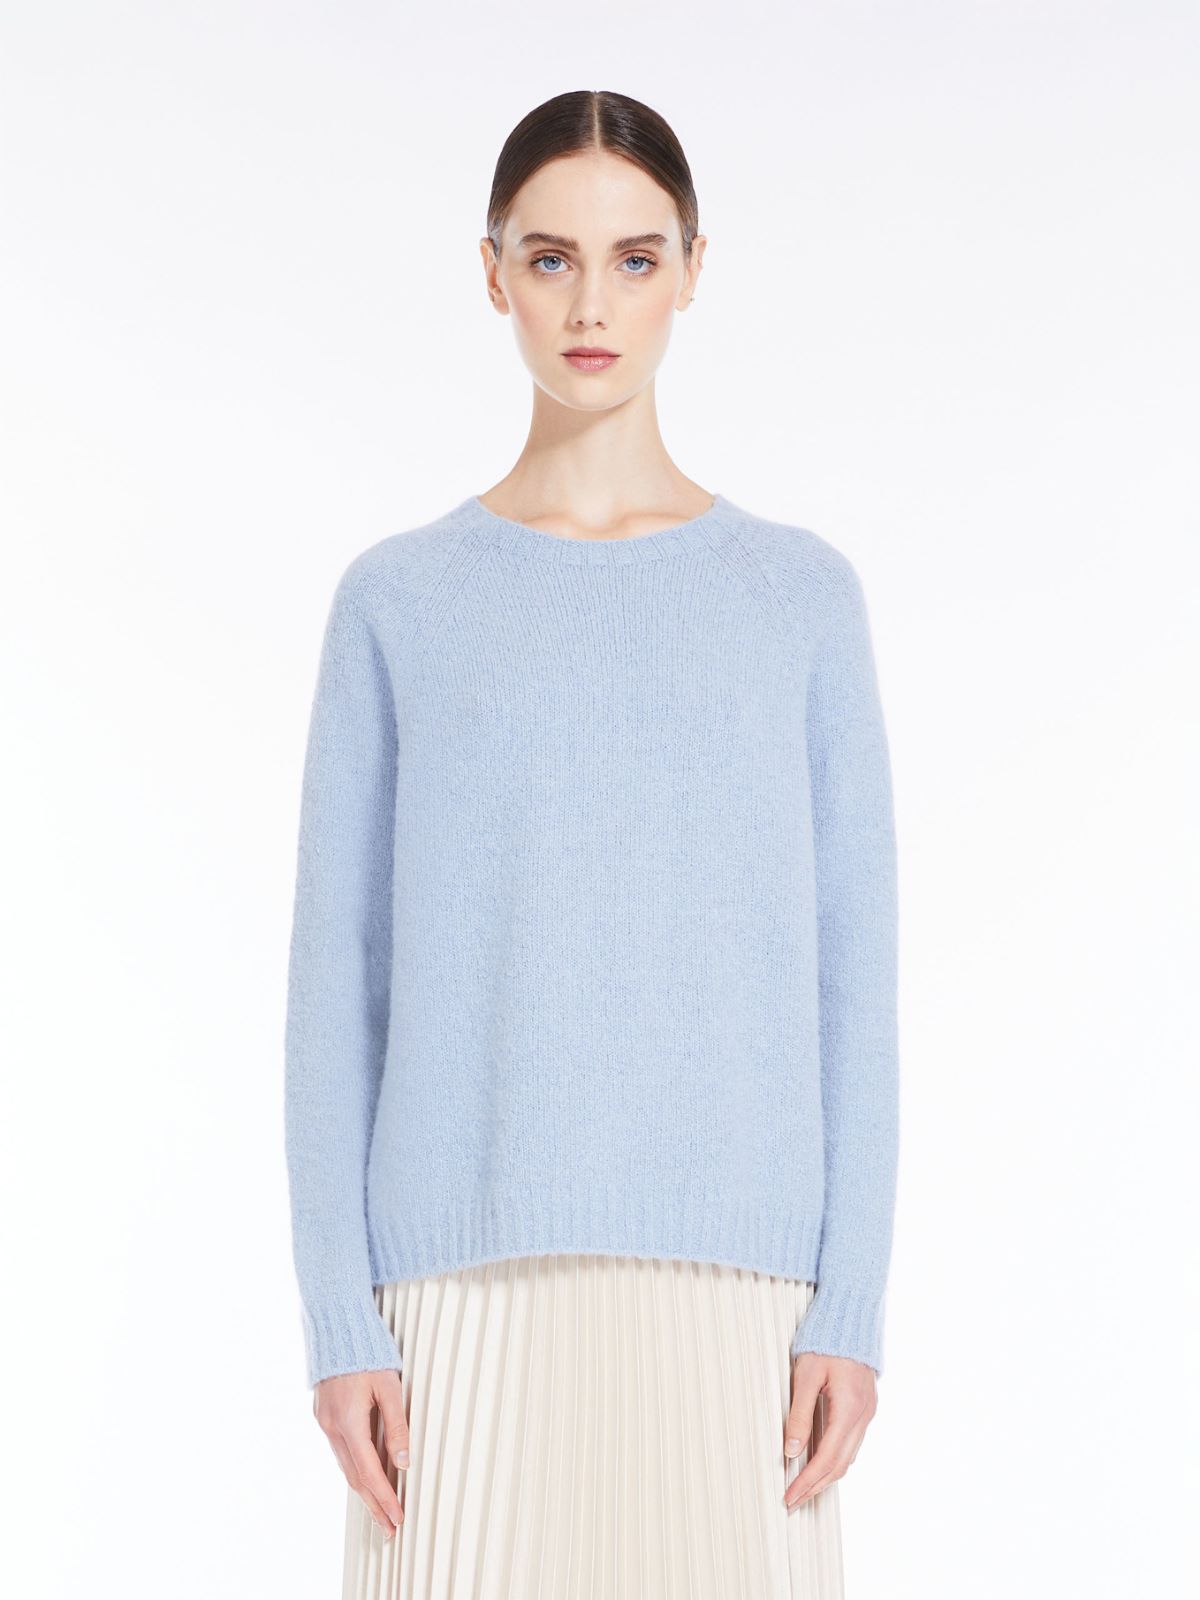 Soft knit top in alpaca and cotton - LIGHT BLUE - Weekend Max Mara - 2